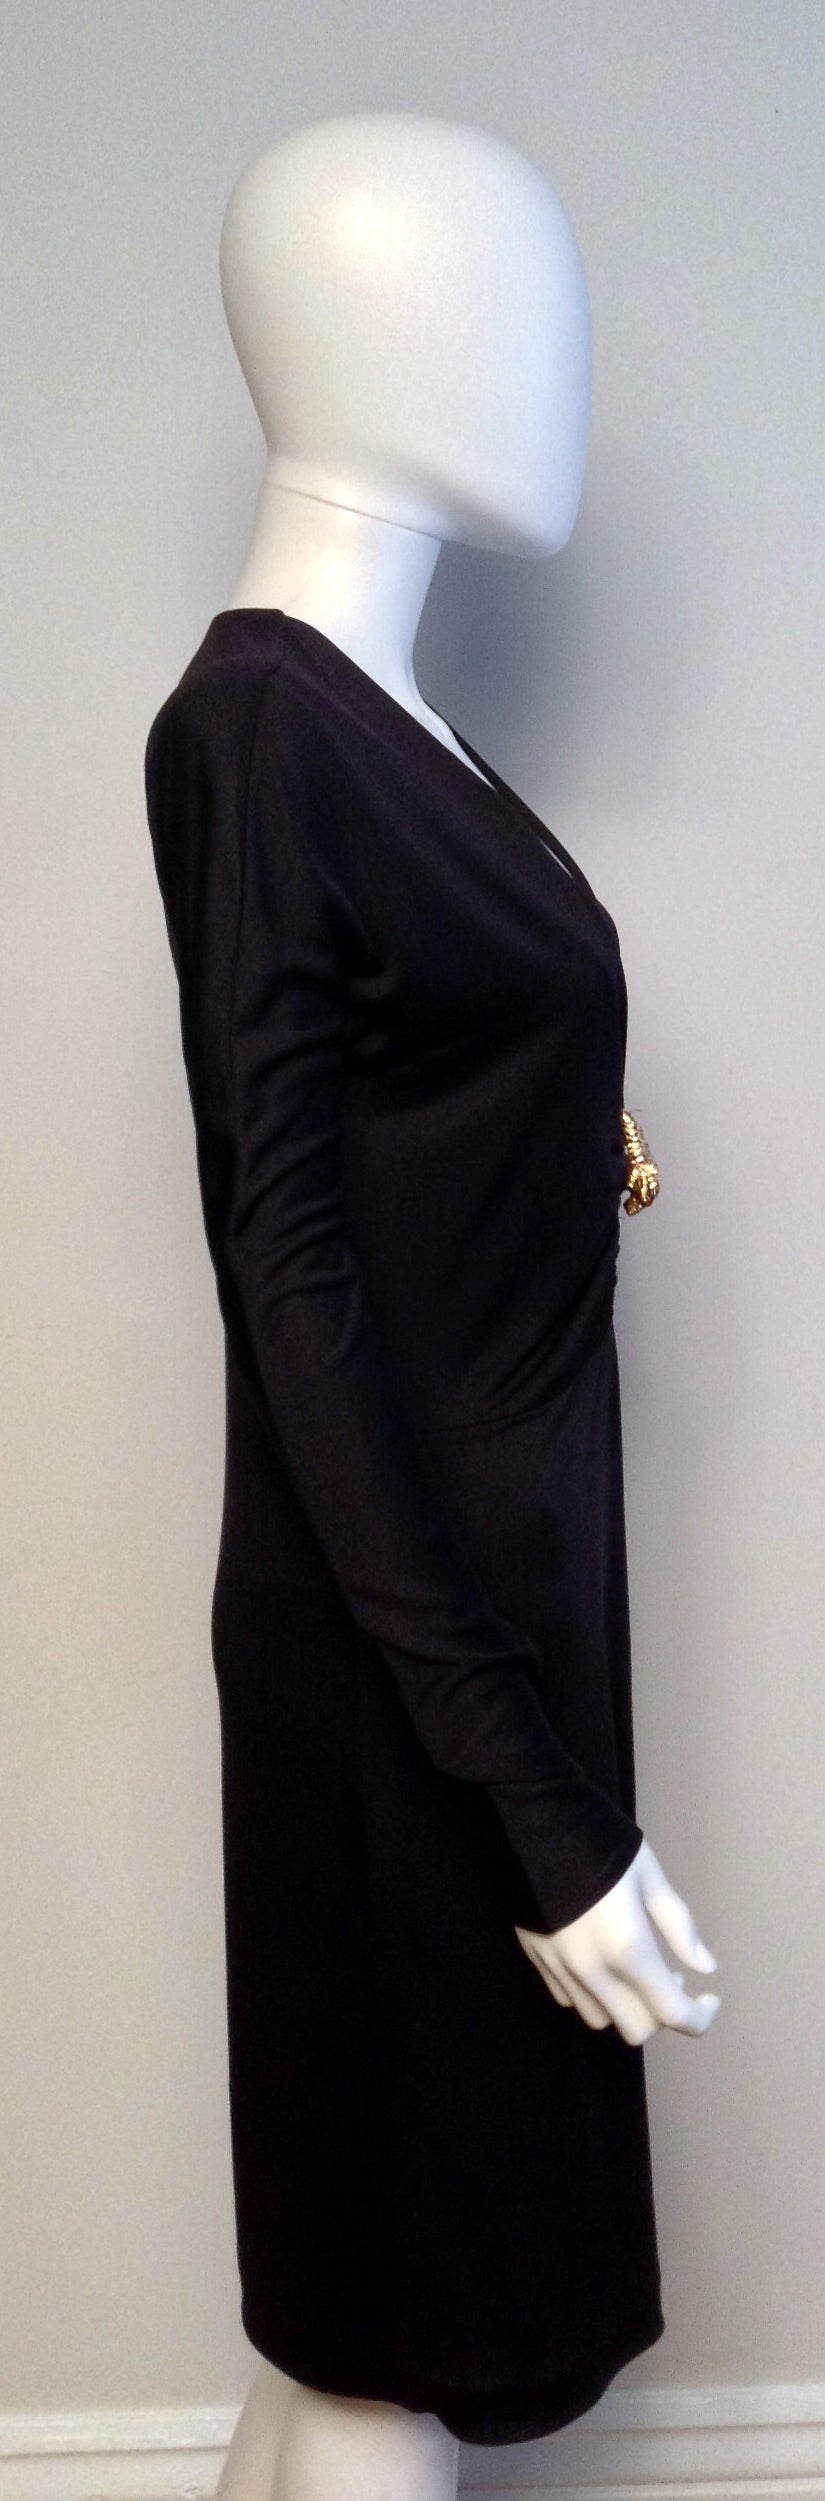 Tom Ford Gucci Black Silk Jersey dress with Gold Tiger Size IT40/8 For Sale 2